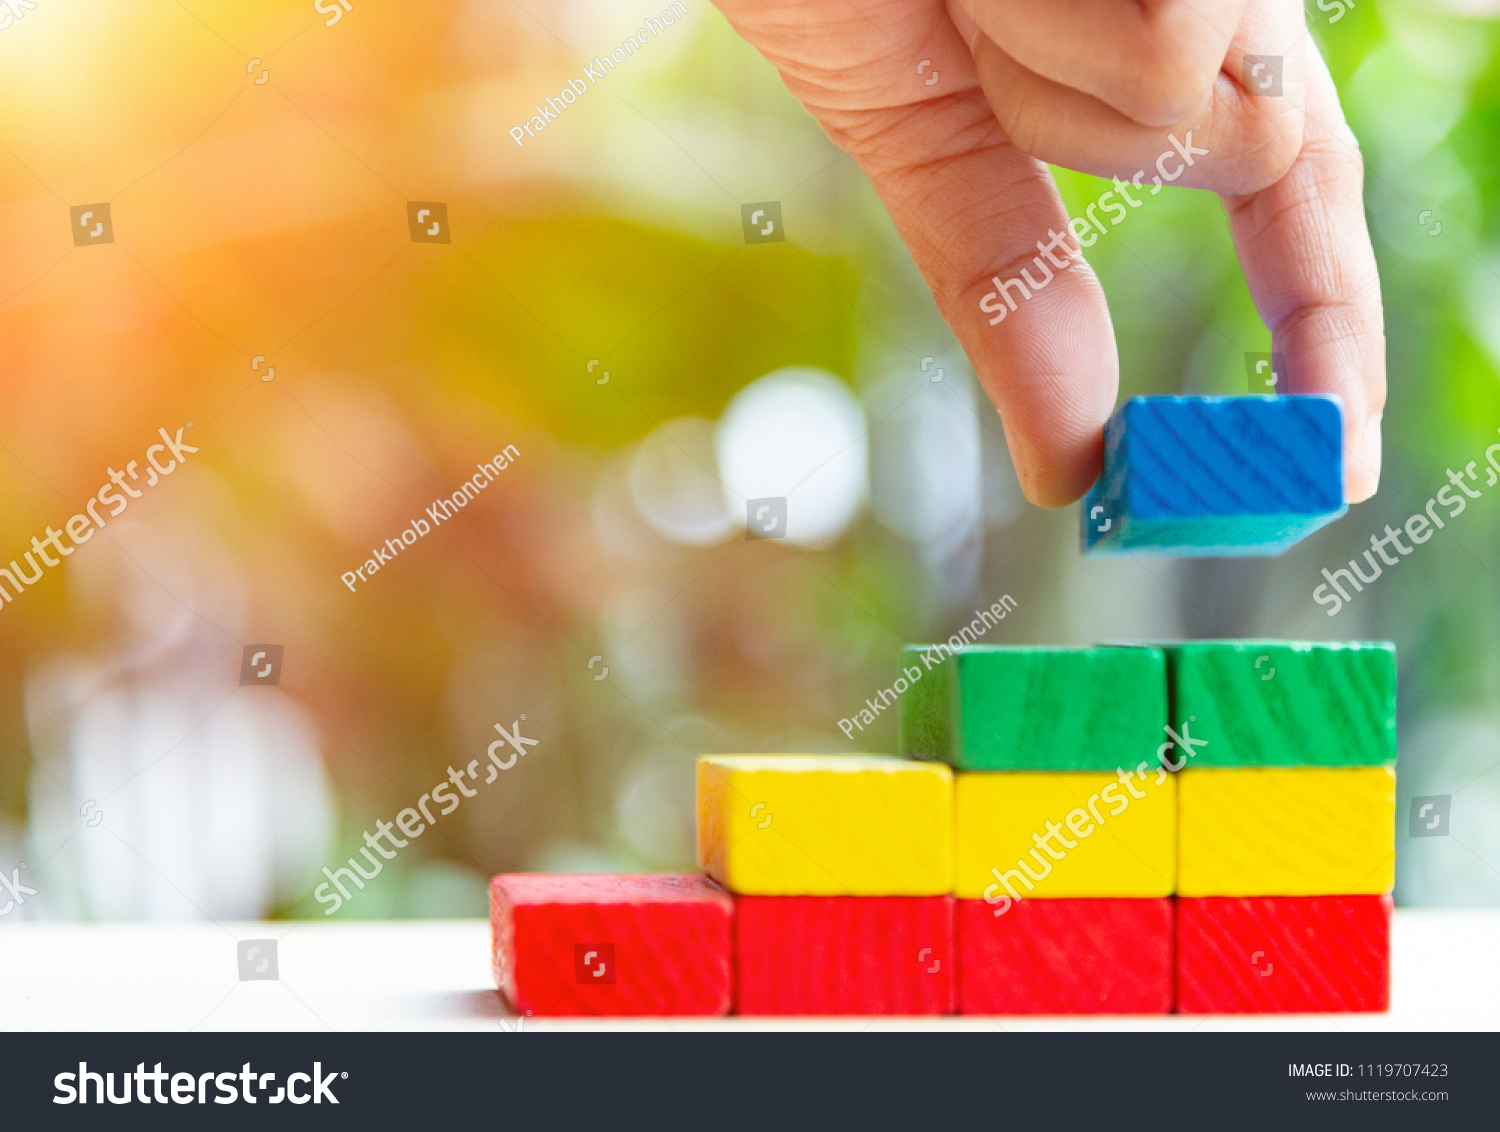 Concepts of building a staircase and step up of wooden pegs for another entrepreneur to climb up the ladder of success.Two finger hold blue block wood last piece for close project. #1119707423